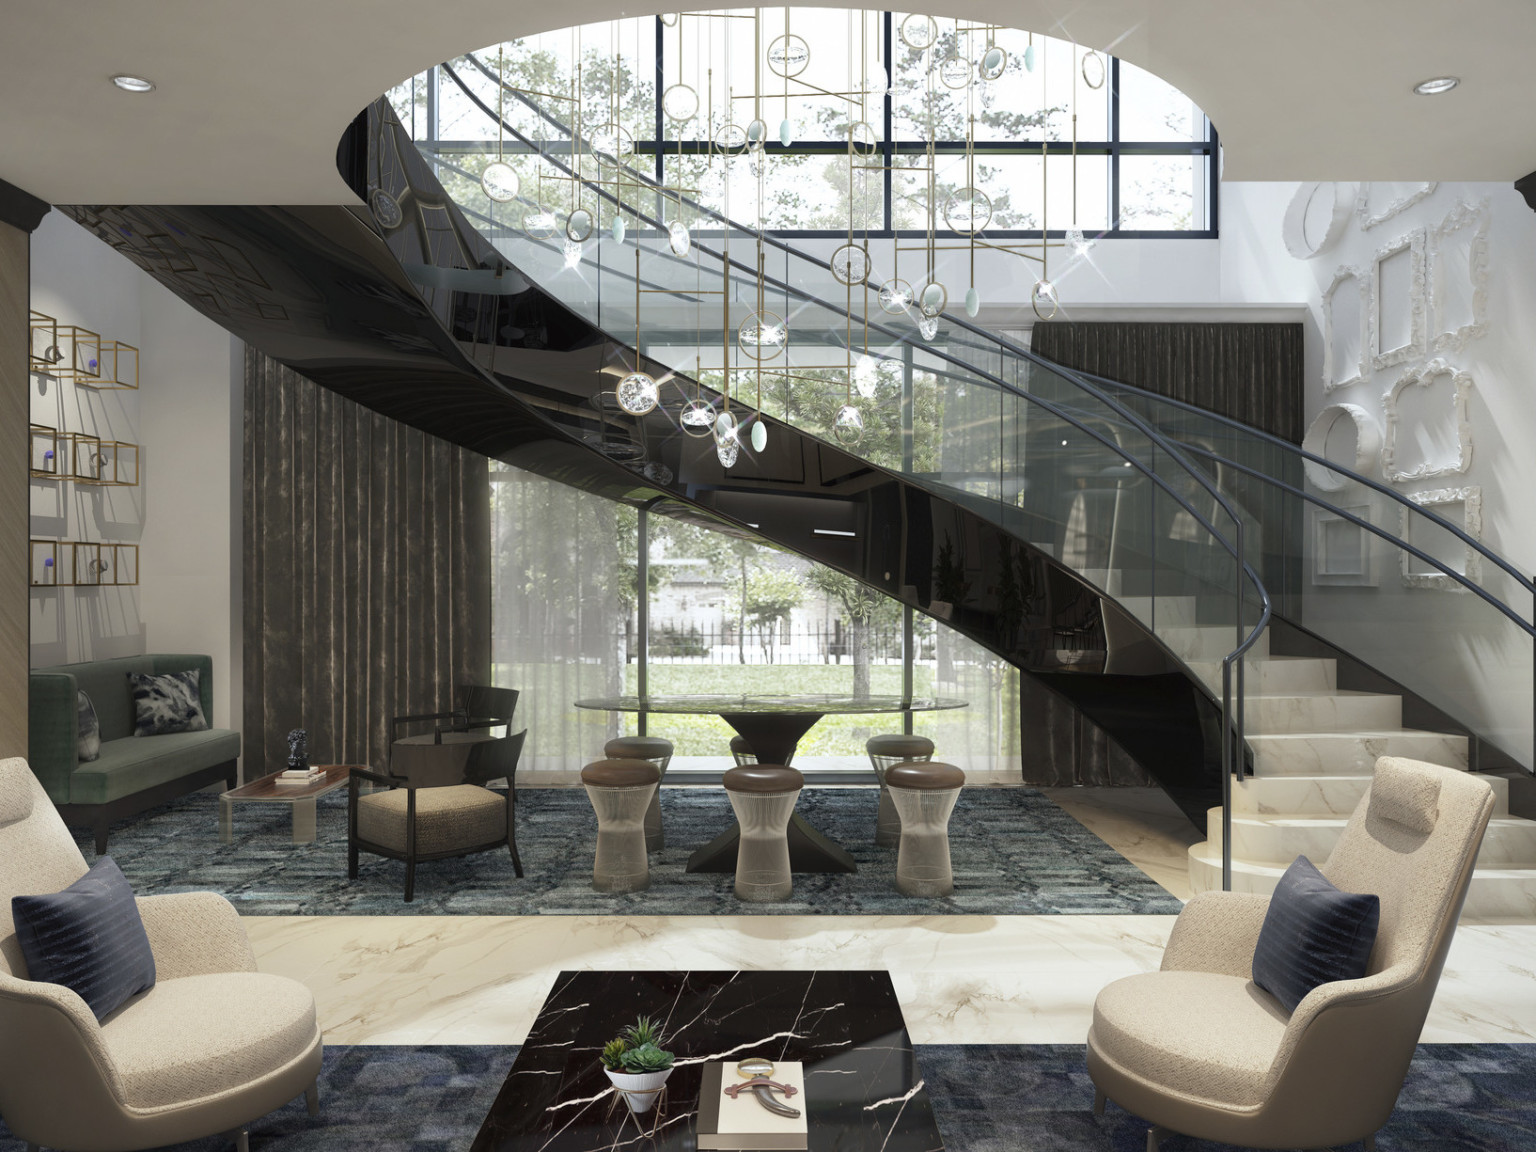 2 seating areas divided by a walkway at the base of a marble spiral staircase with shiny black base and glass bannister